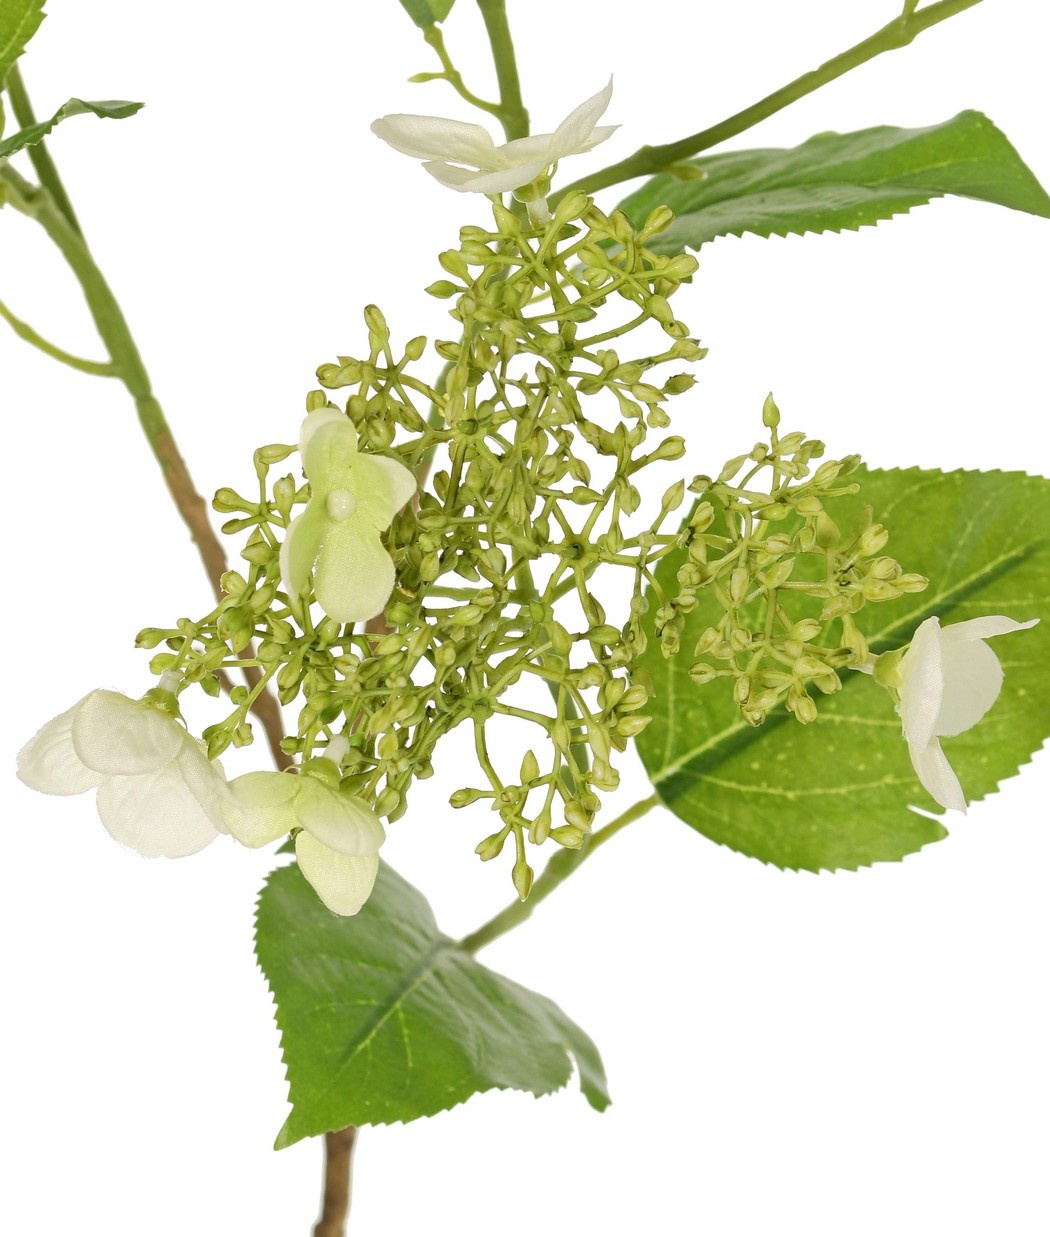 Hydrangea (Hydrangea) 'Garden Joy' 3-branched, with 5 bud and flower clusters, 13 leaves, 78 cm